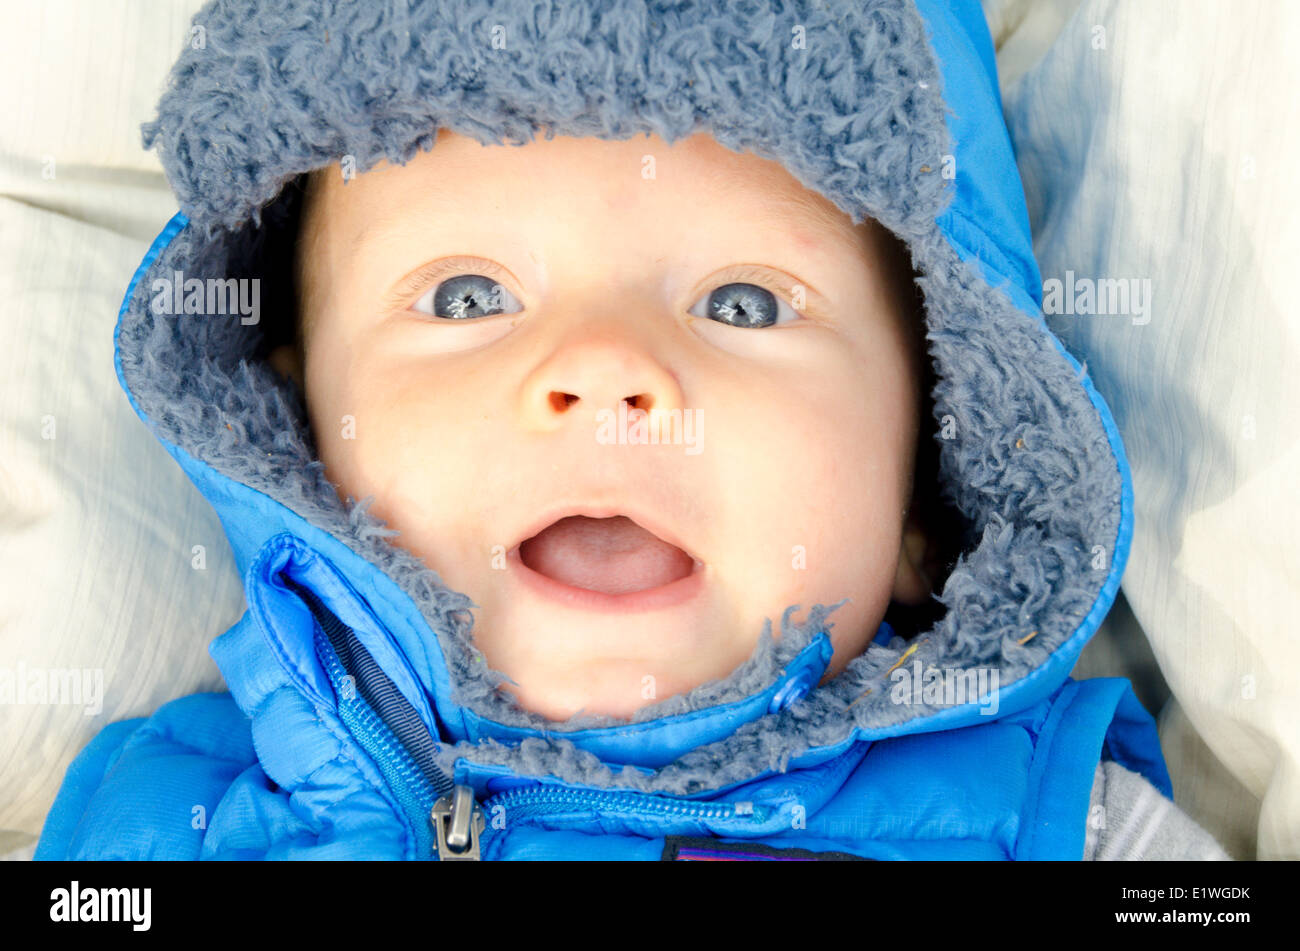 A six-month-old baby all bundled up for going outside Stock Photo